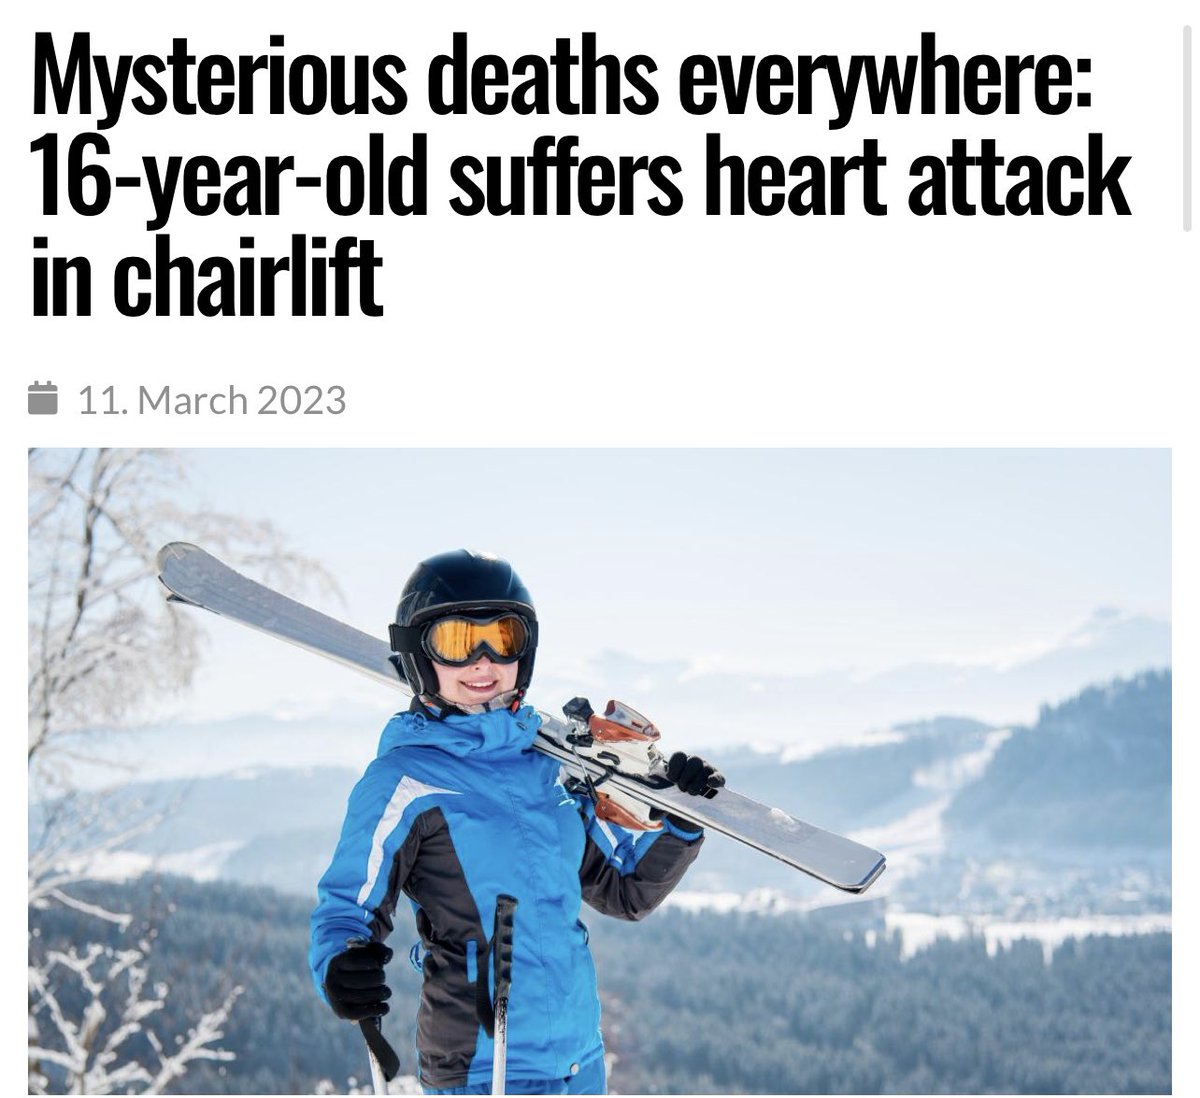 A 16 year old boy from Italy suffered a heart attack last week while riding a chairlift up the mountain in the Prali ski area. He was airlifted to a nearby hospital, but unfortunately he did not survive. His organs have been donated. report24.news/ueberall-myste…